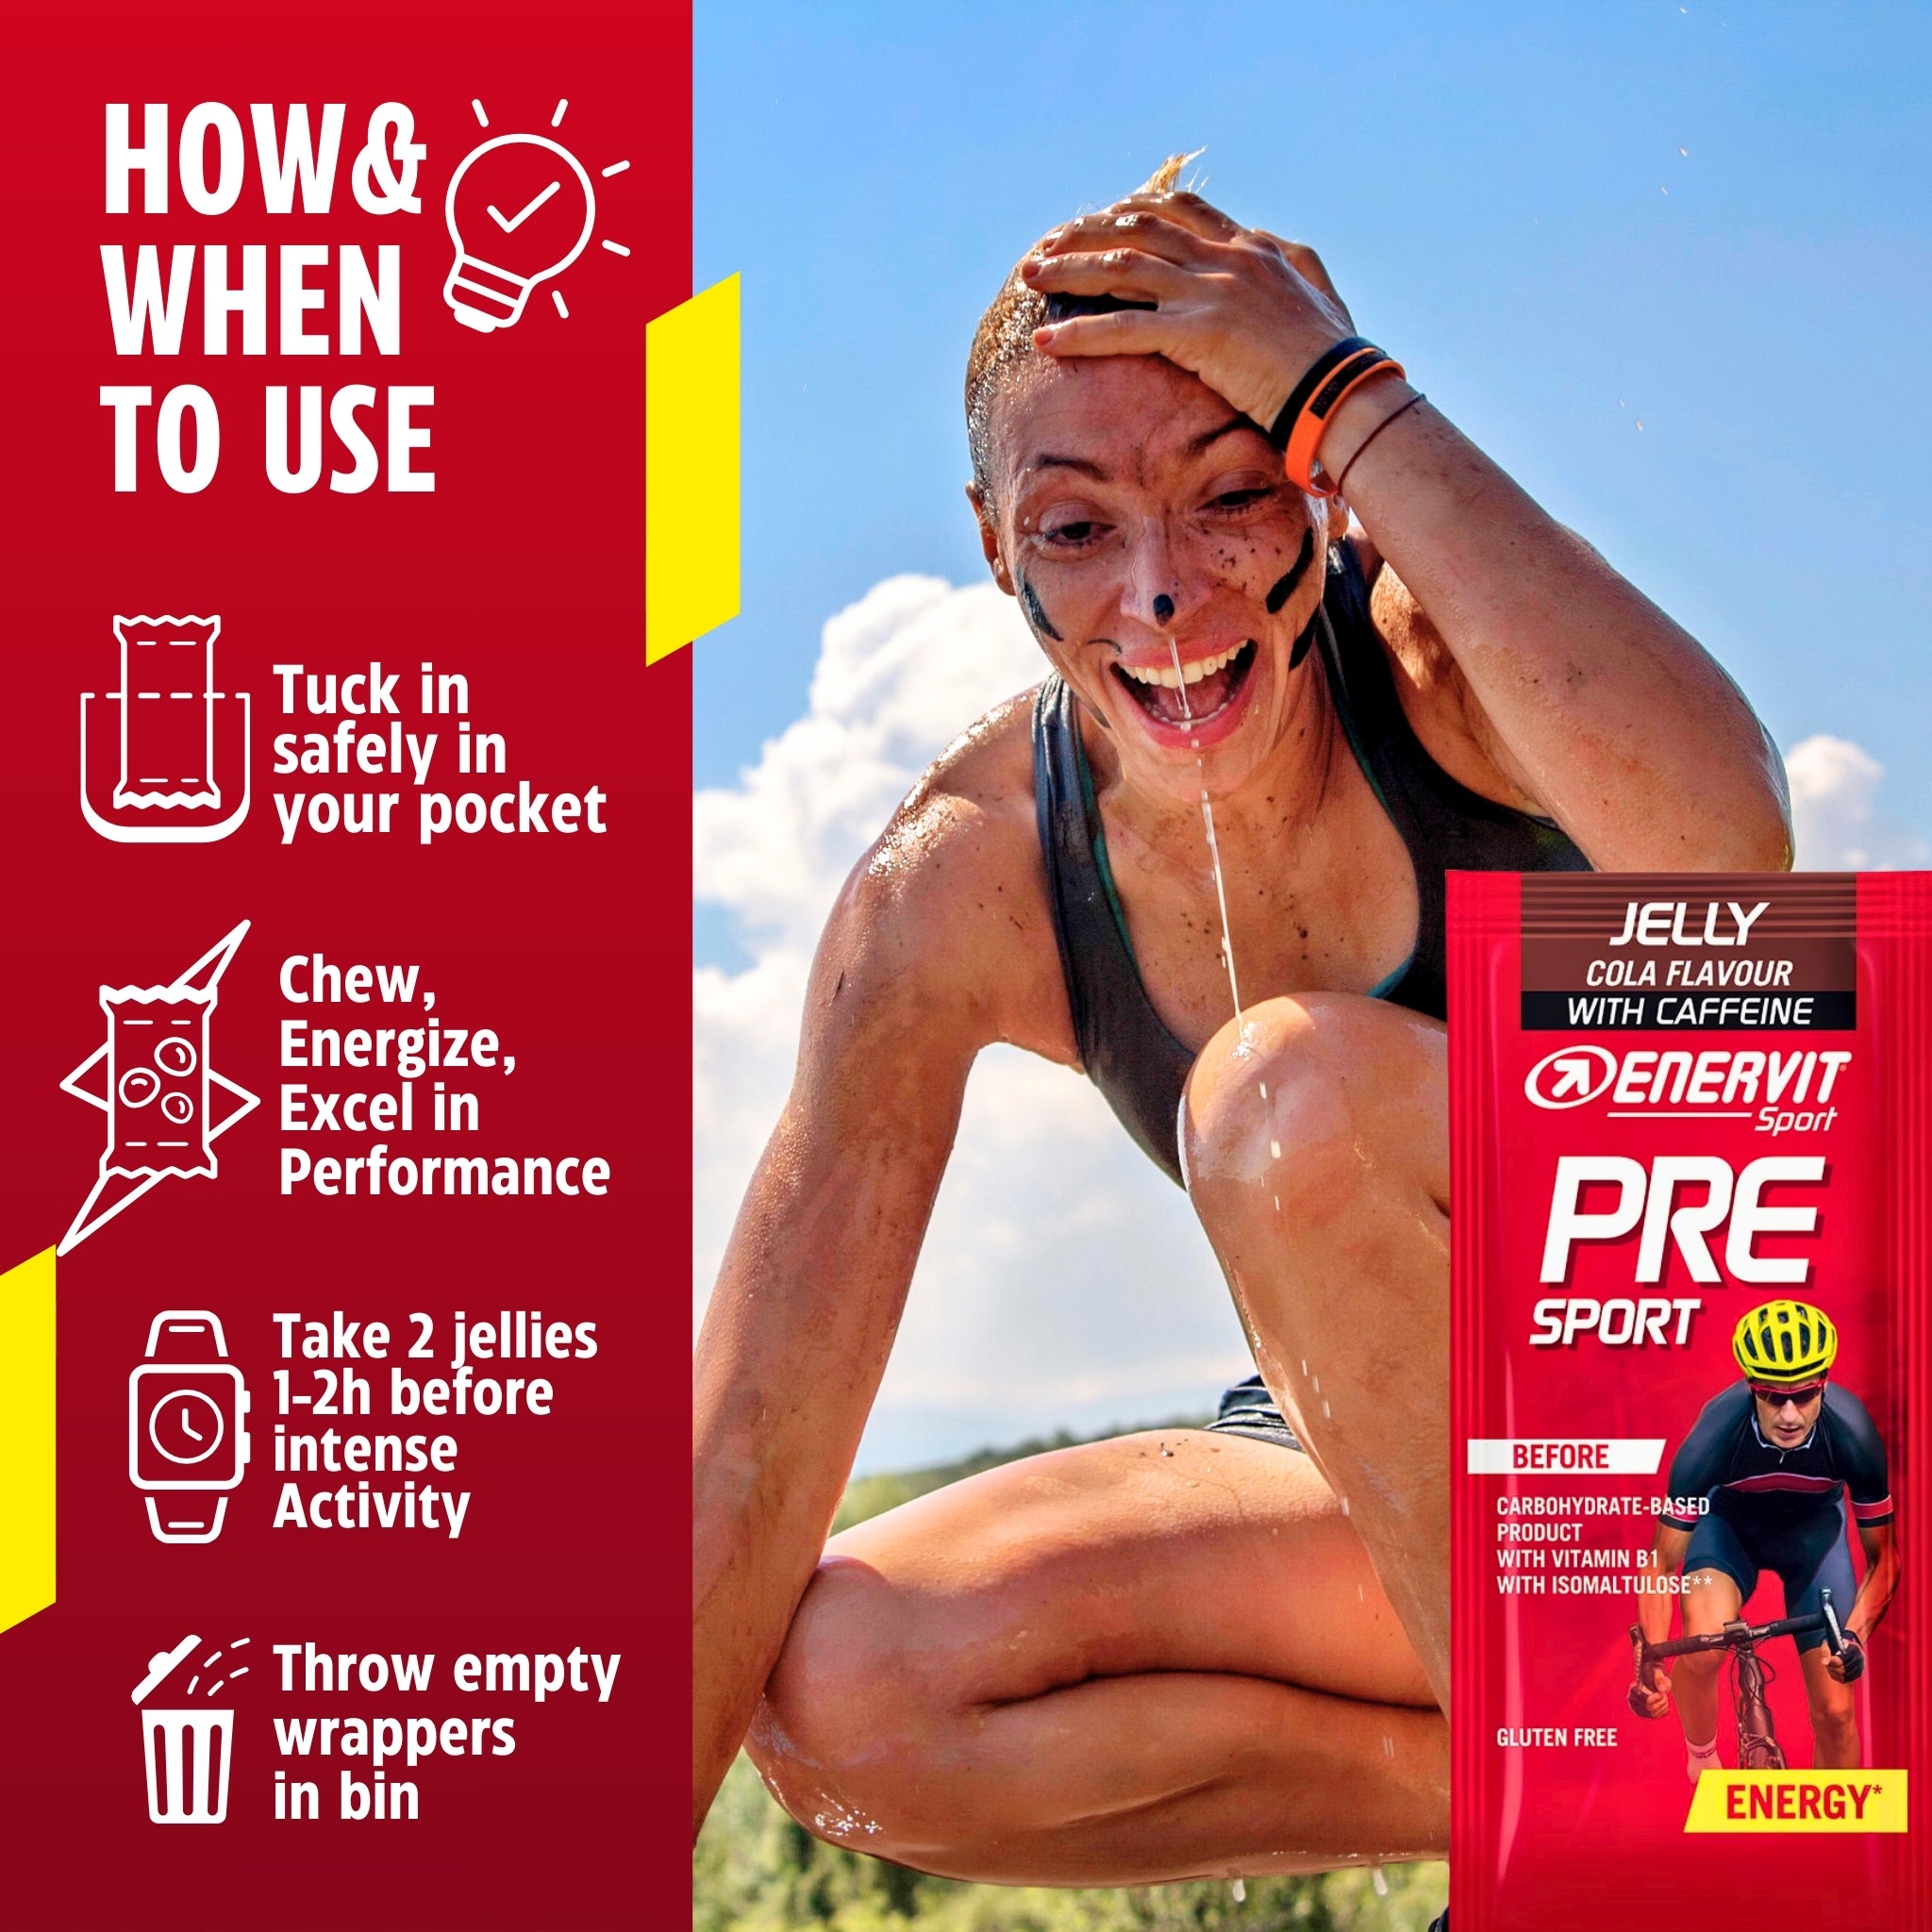 Enervit Cola Pre Sport Jelly With Caffeine - How and When To use